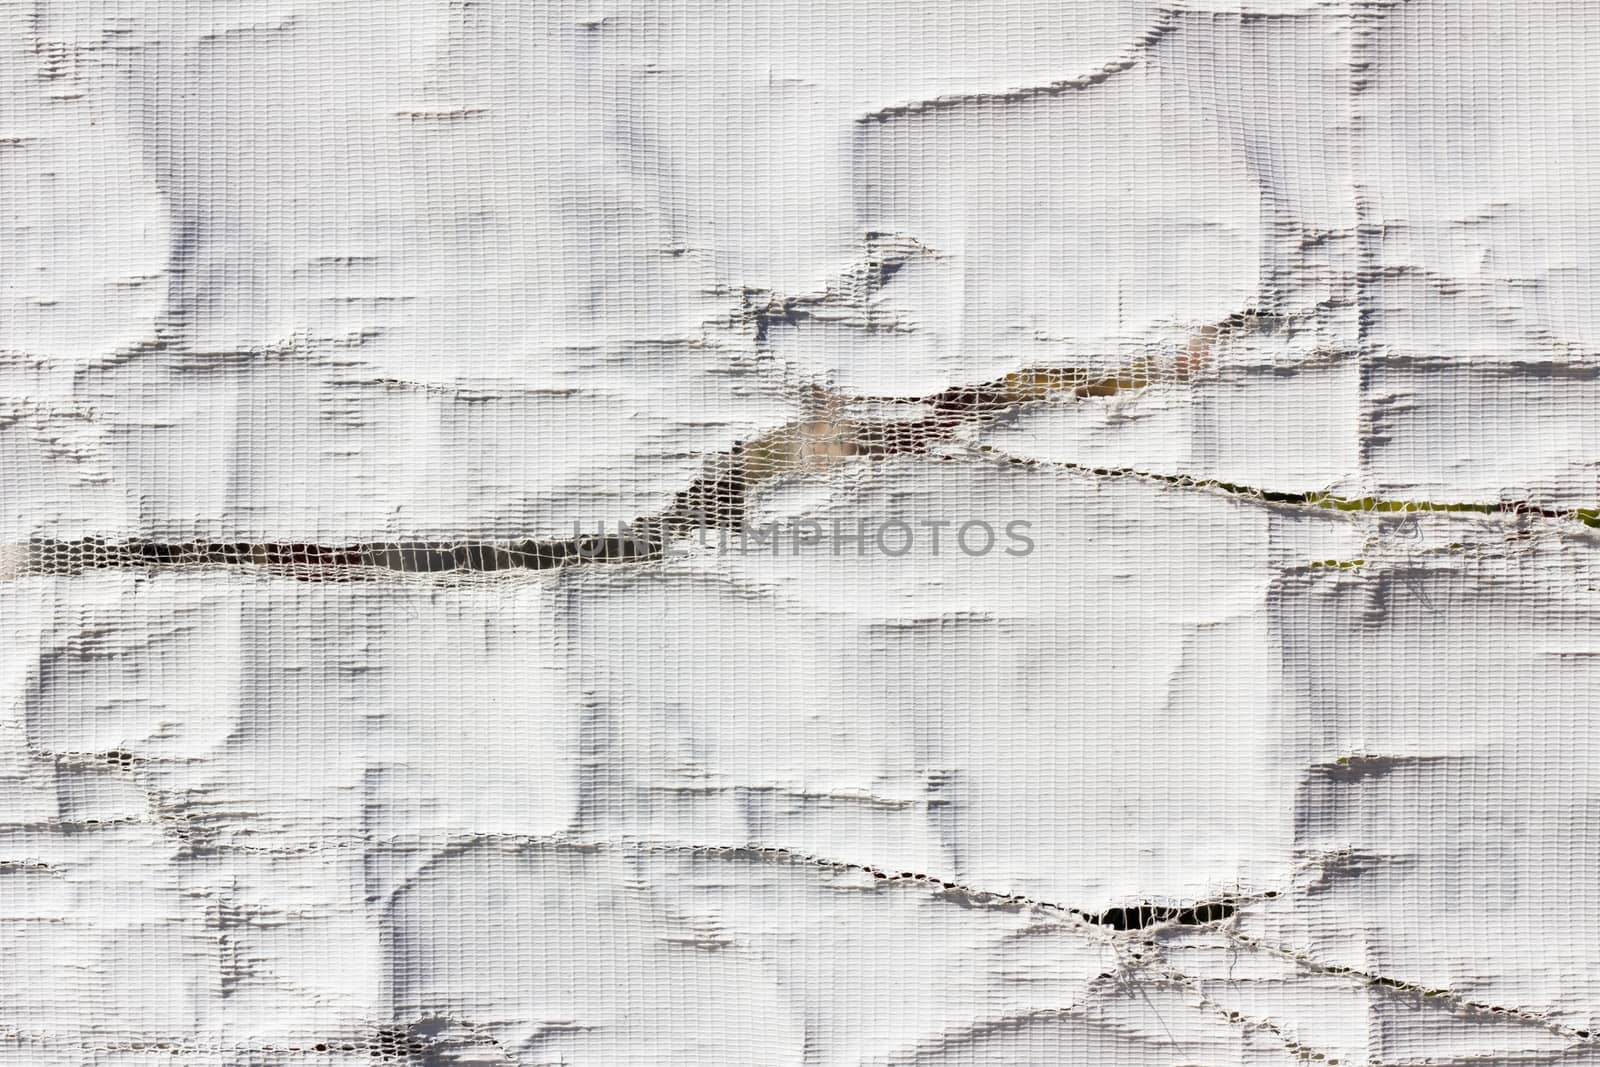 Texture of the old fabric and paper, background.